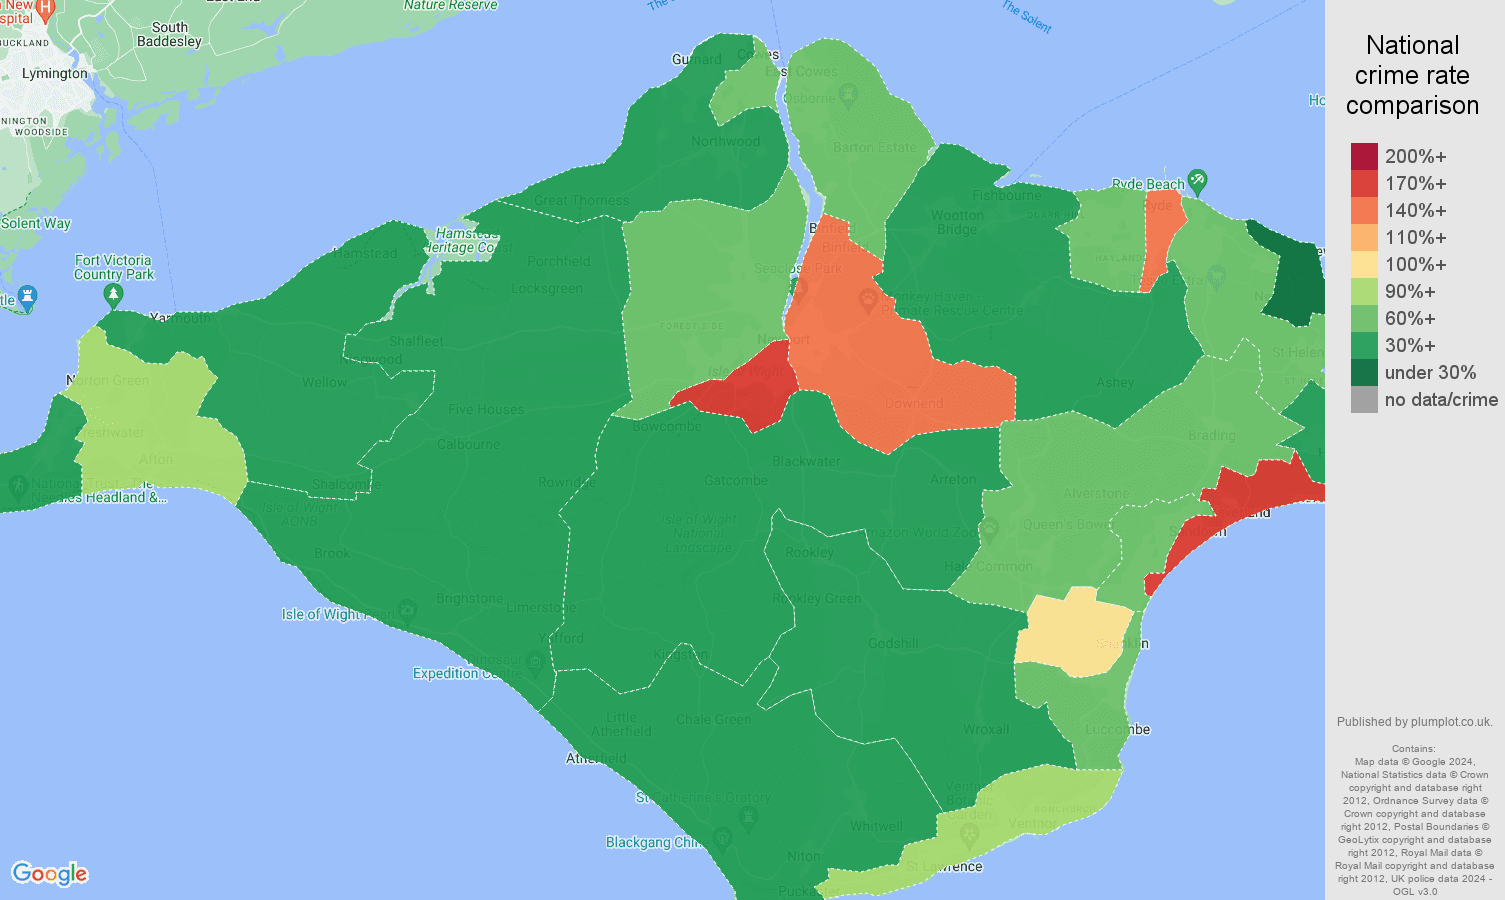 Isle of Wight crime rate comparison map